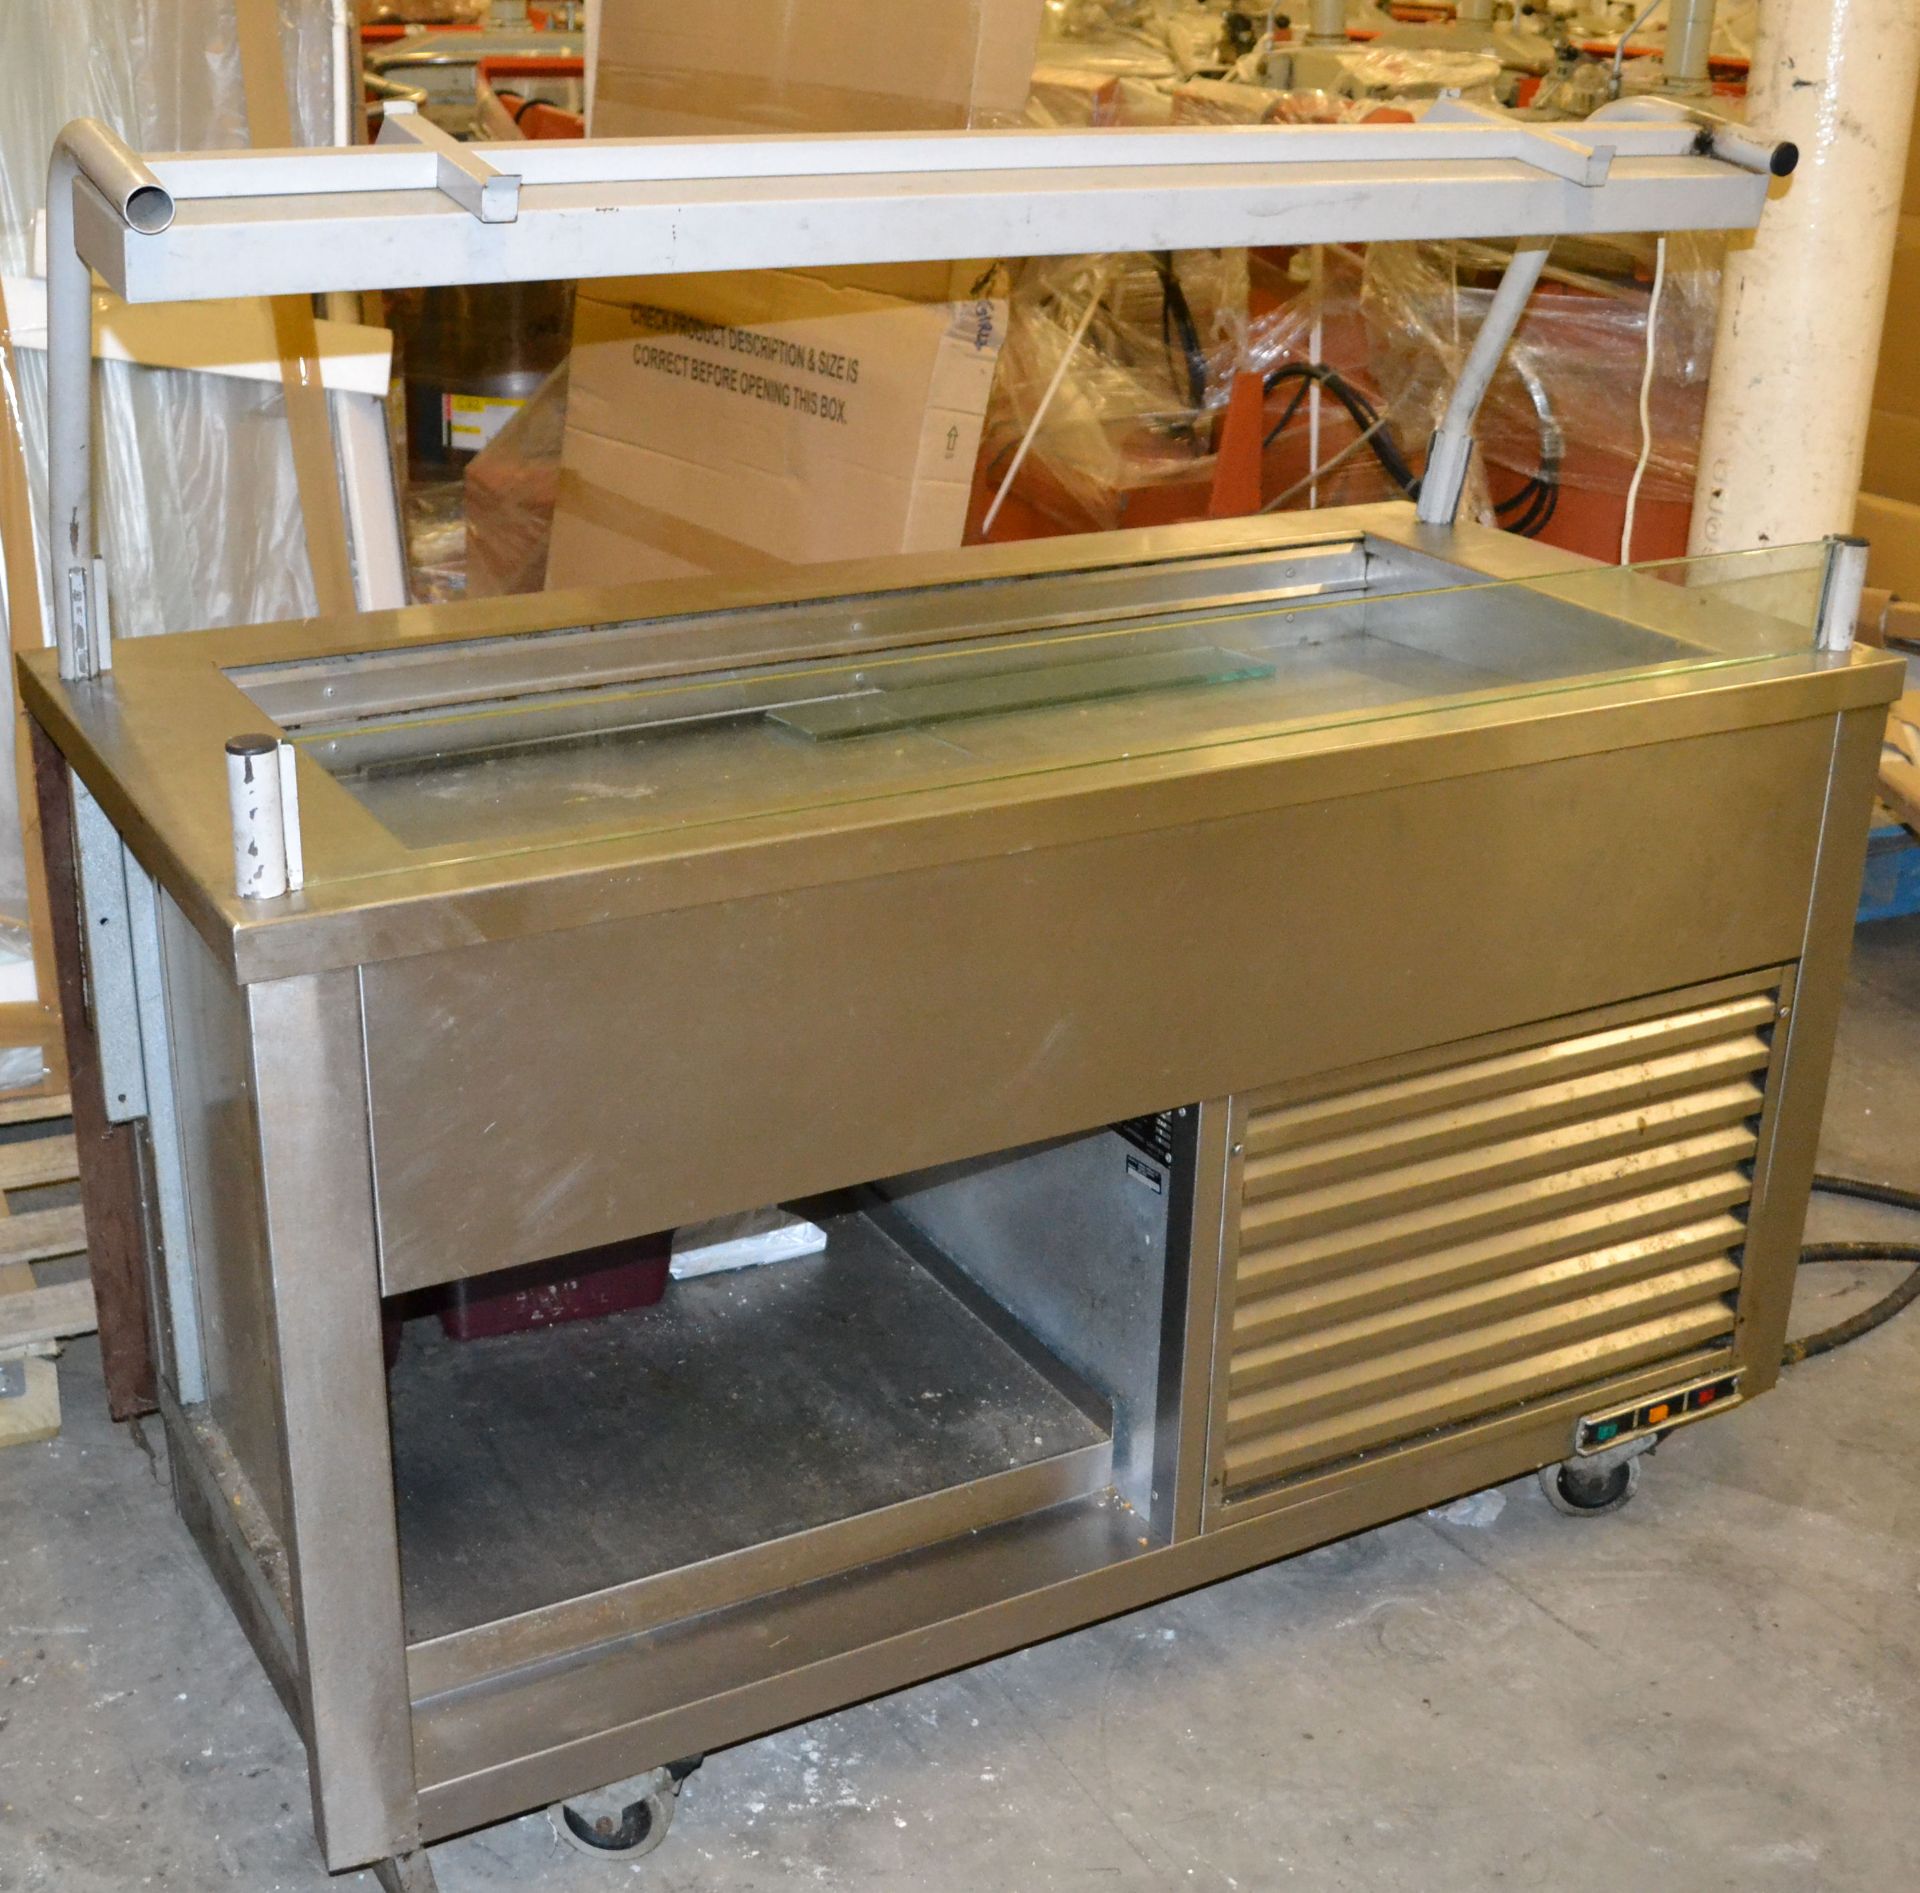 1 x Advanced Catering Equipment 1500BADW 240V Chilled Counter - Details to follow - Ref: FJC011 - - Image 3 of 10